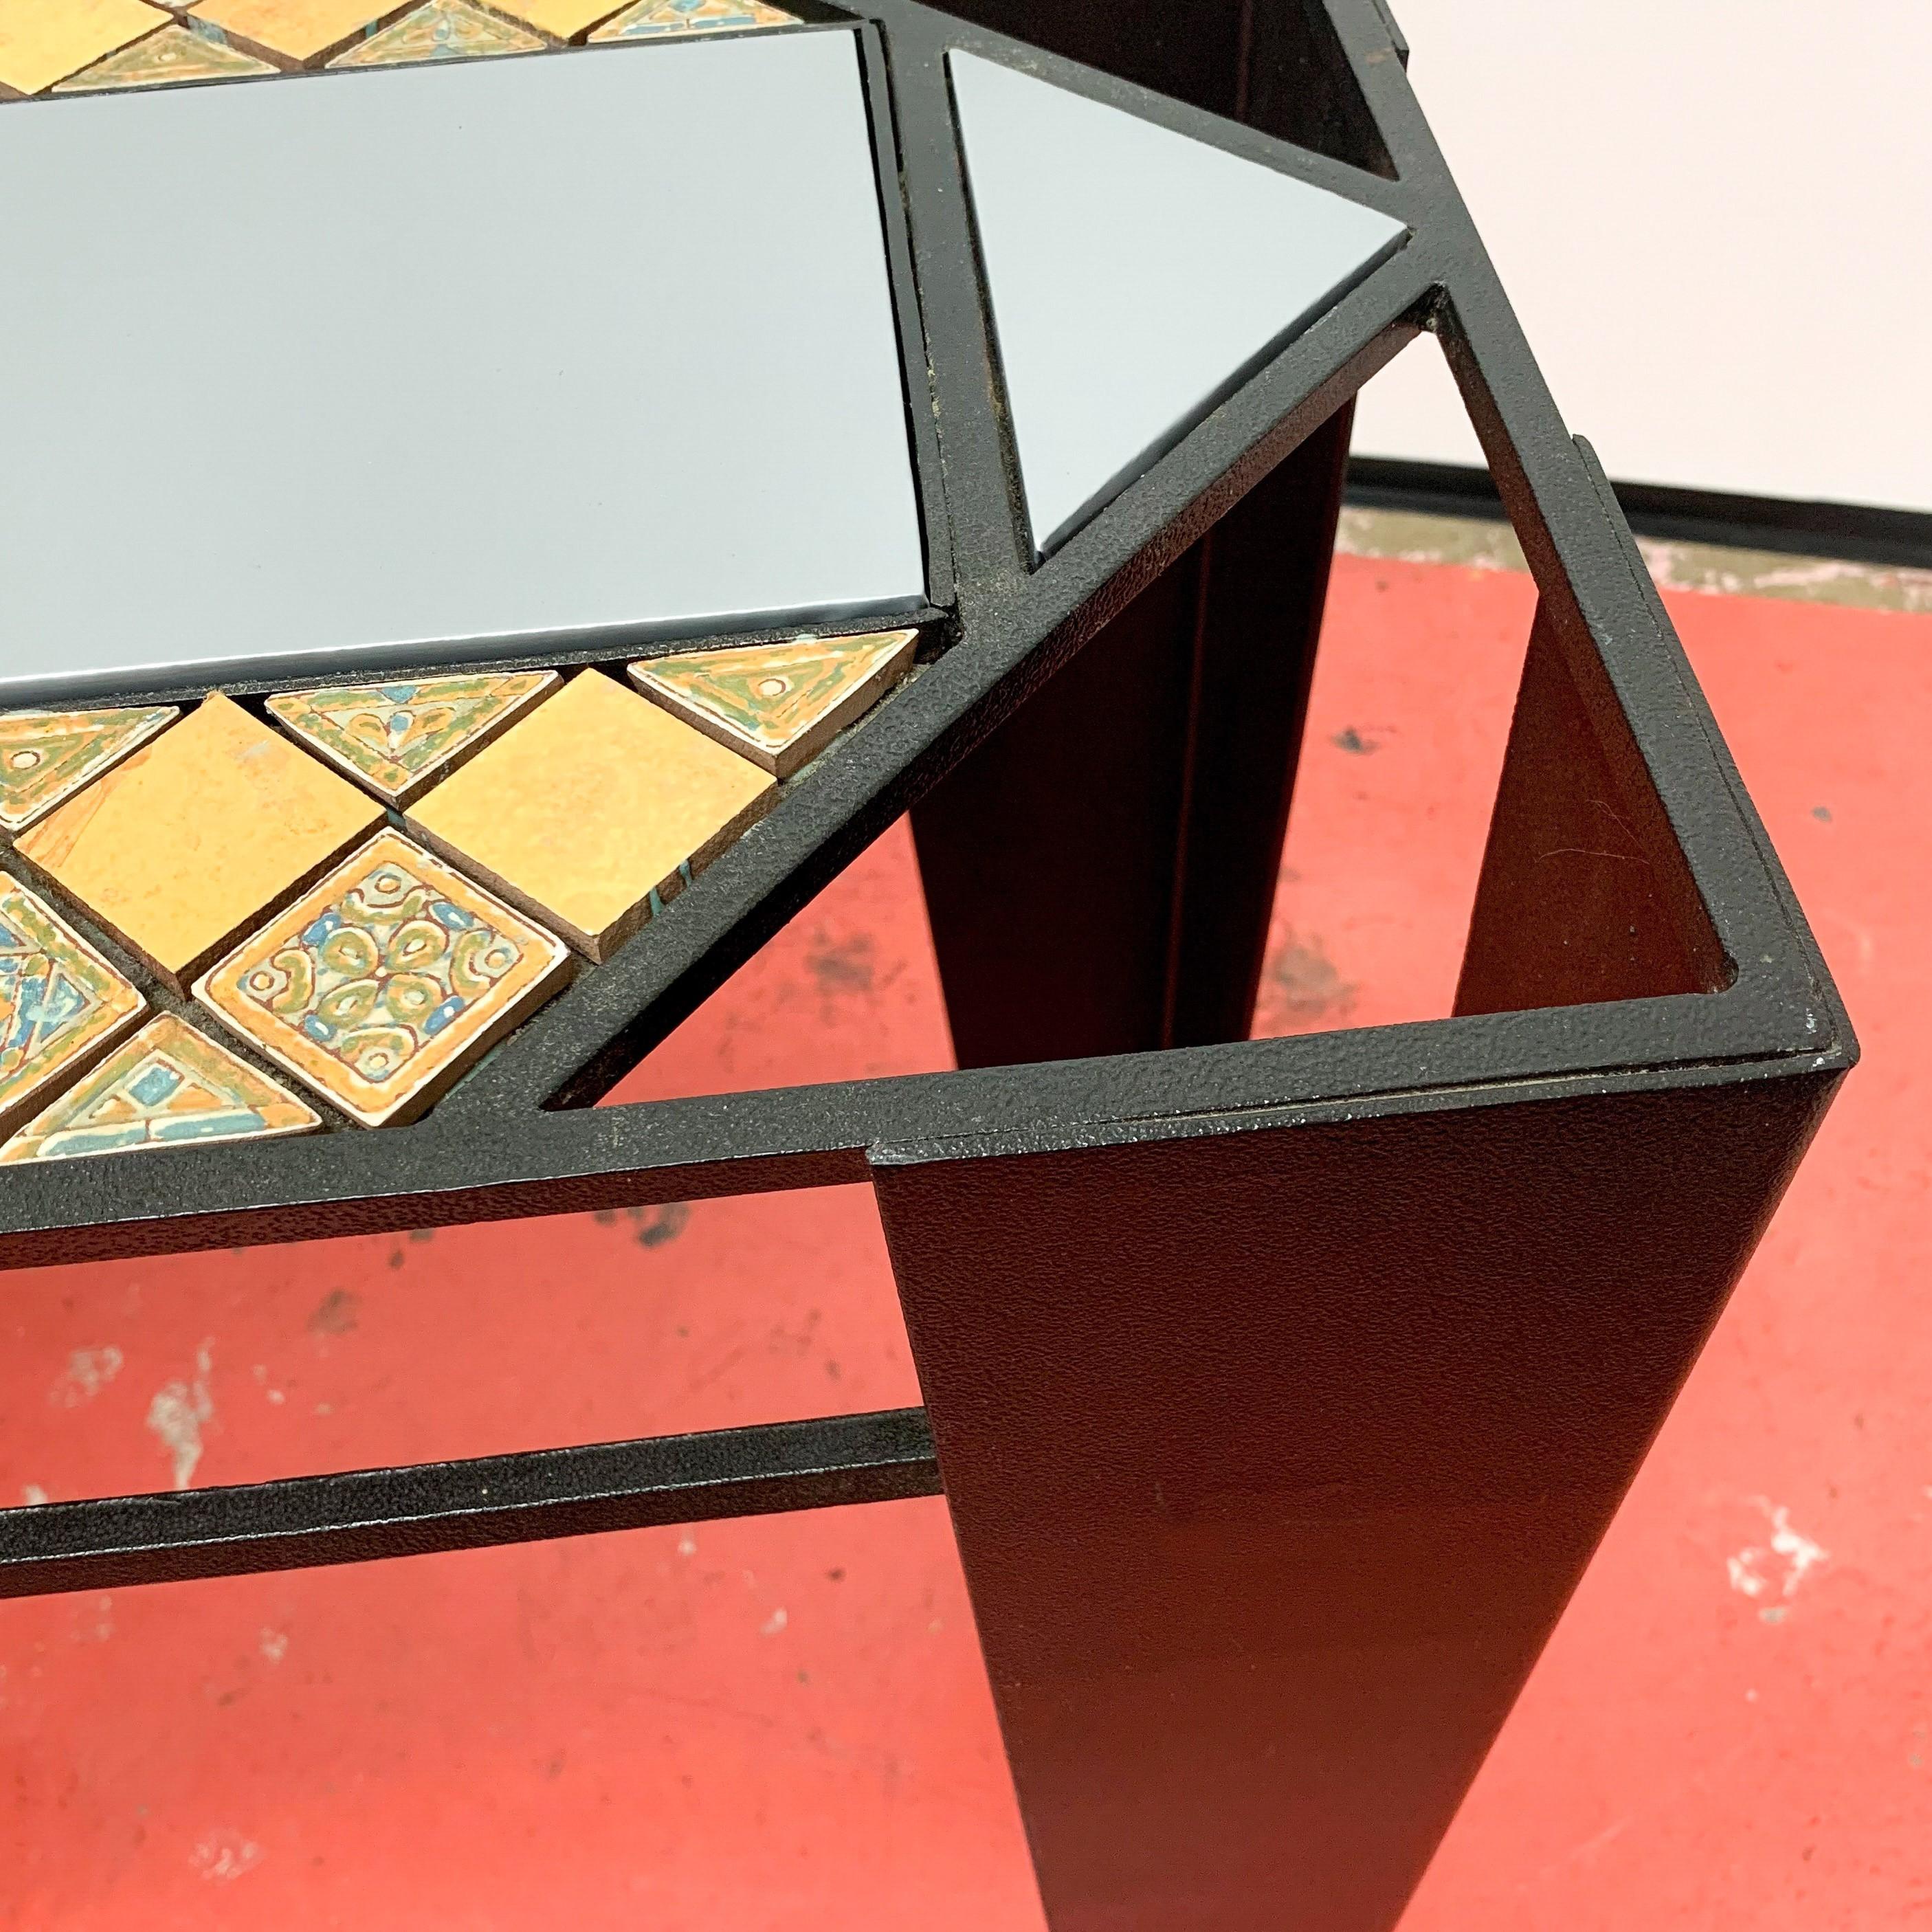 Postmodern Console Table in PVC with Glass & Tiled Top, British, c1990s In Good Condition For Sale In London, GB